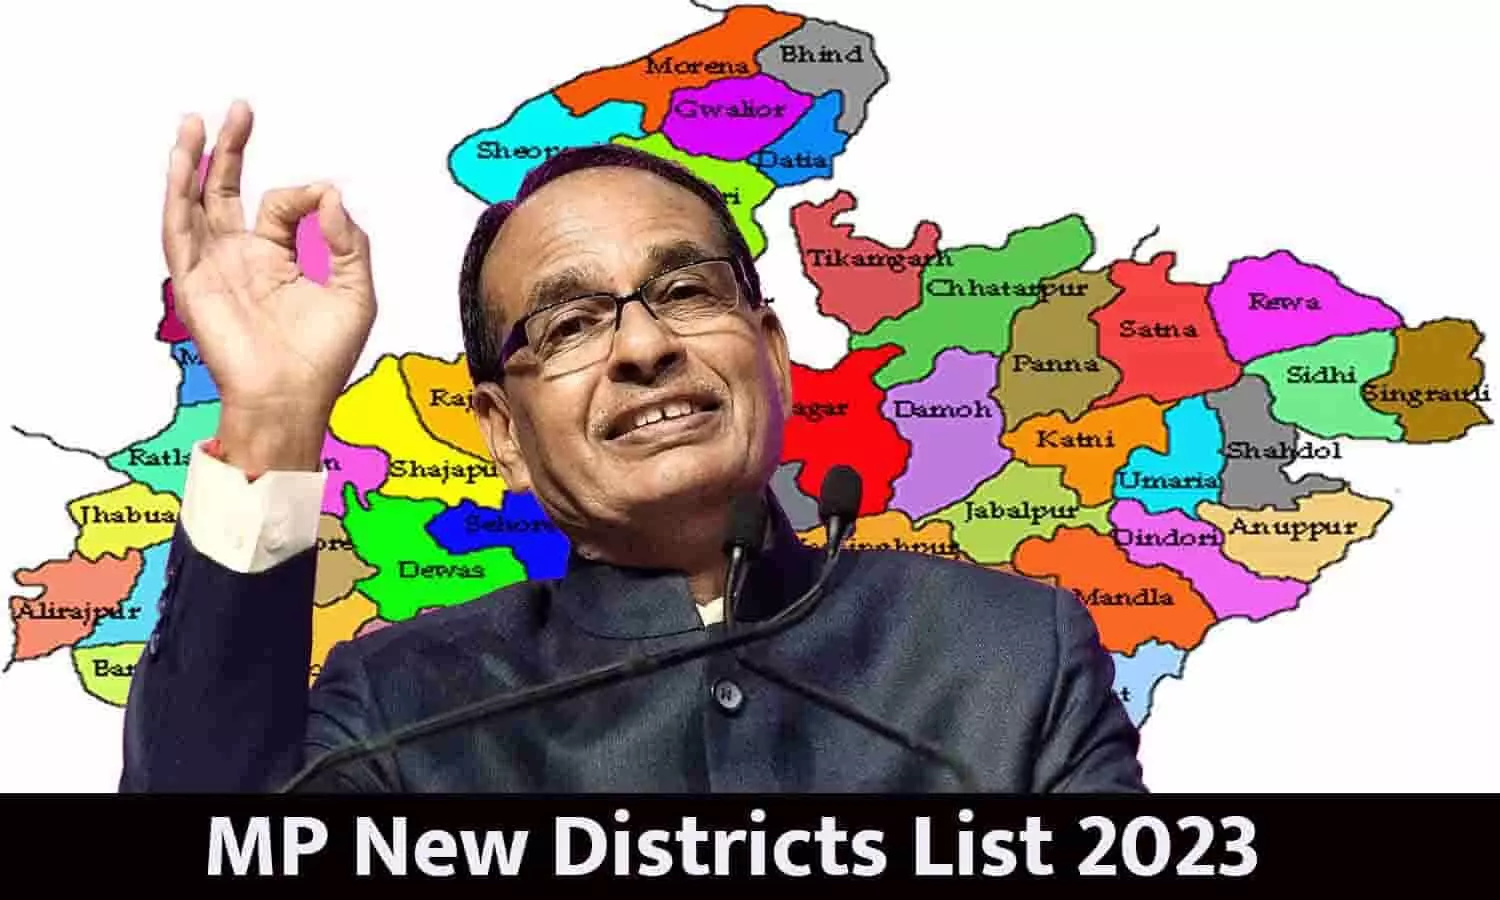 MP New Districts List 2023